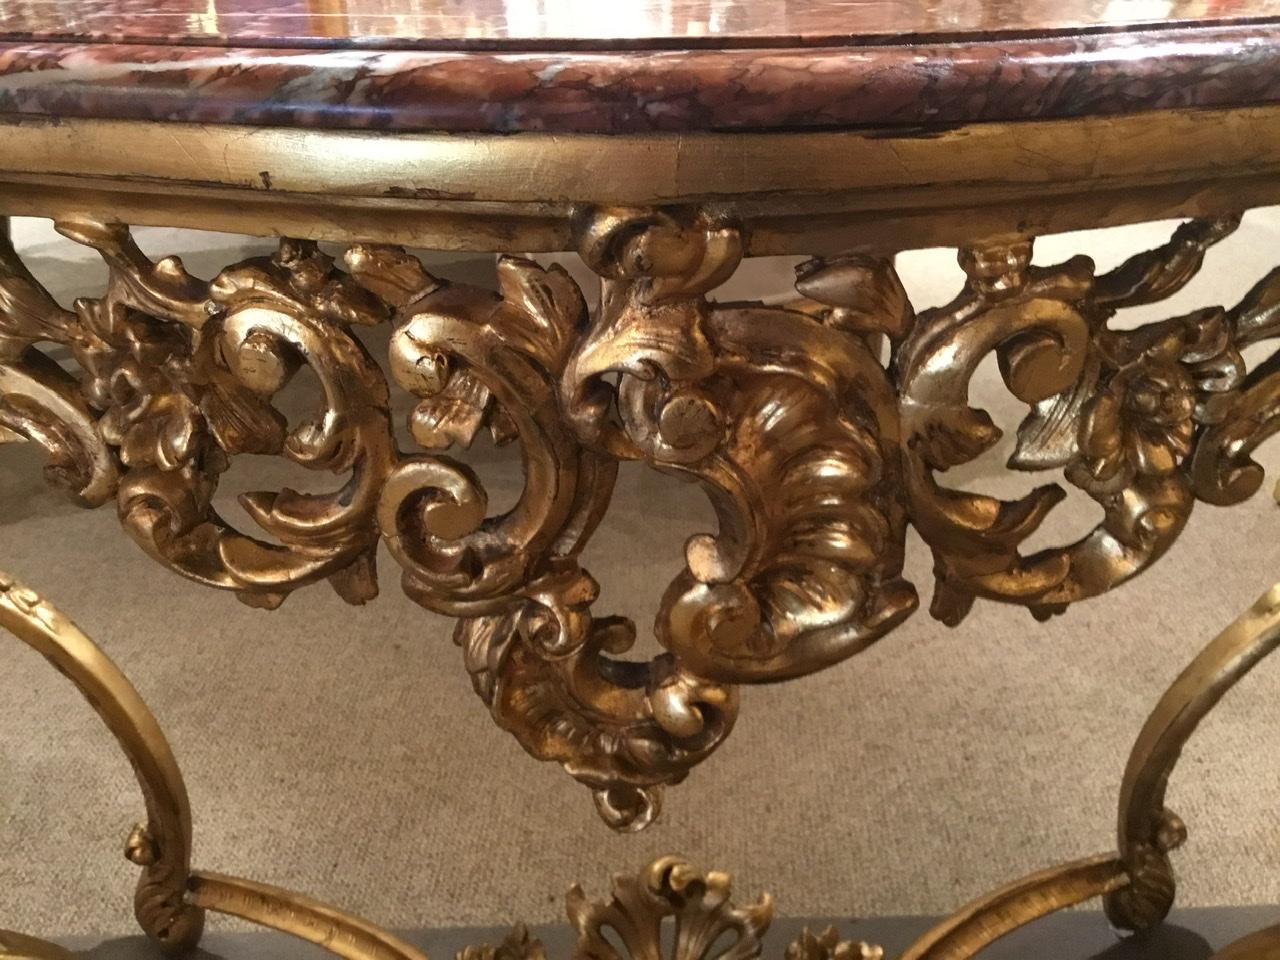 A gilt cartouche at the center front of this piece is beautifully carved with open fret work
in foliate designs and swags. Each of the four corners are curved with a floral motif
Centered on the curve of each leg. A shell cartouche and flowers are